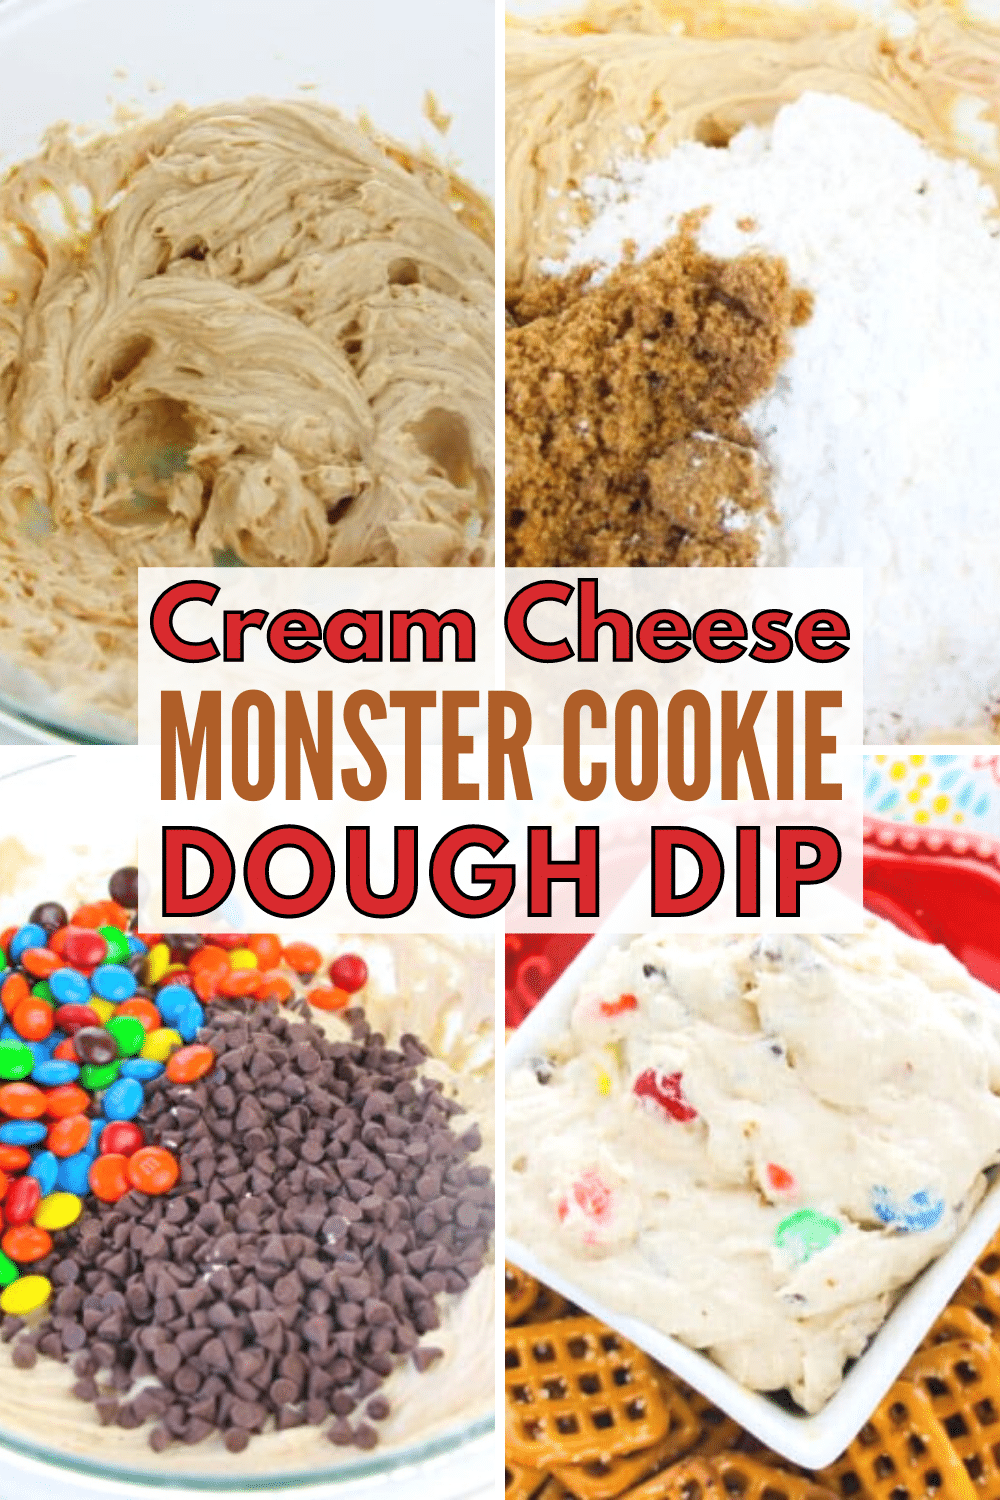 Cream Cheese Monster Cookie Dough Dip is a sweet dessert dip that can be made in minutes. Easy to make ahead of time and great for parties and holidays. #cookiedough #monsterdip #creamcheese via @wondermomwannab